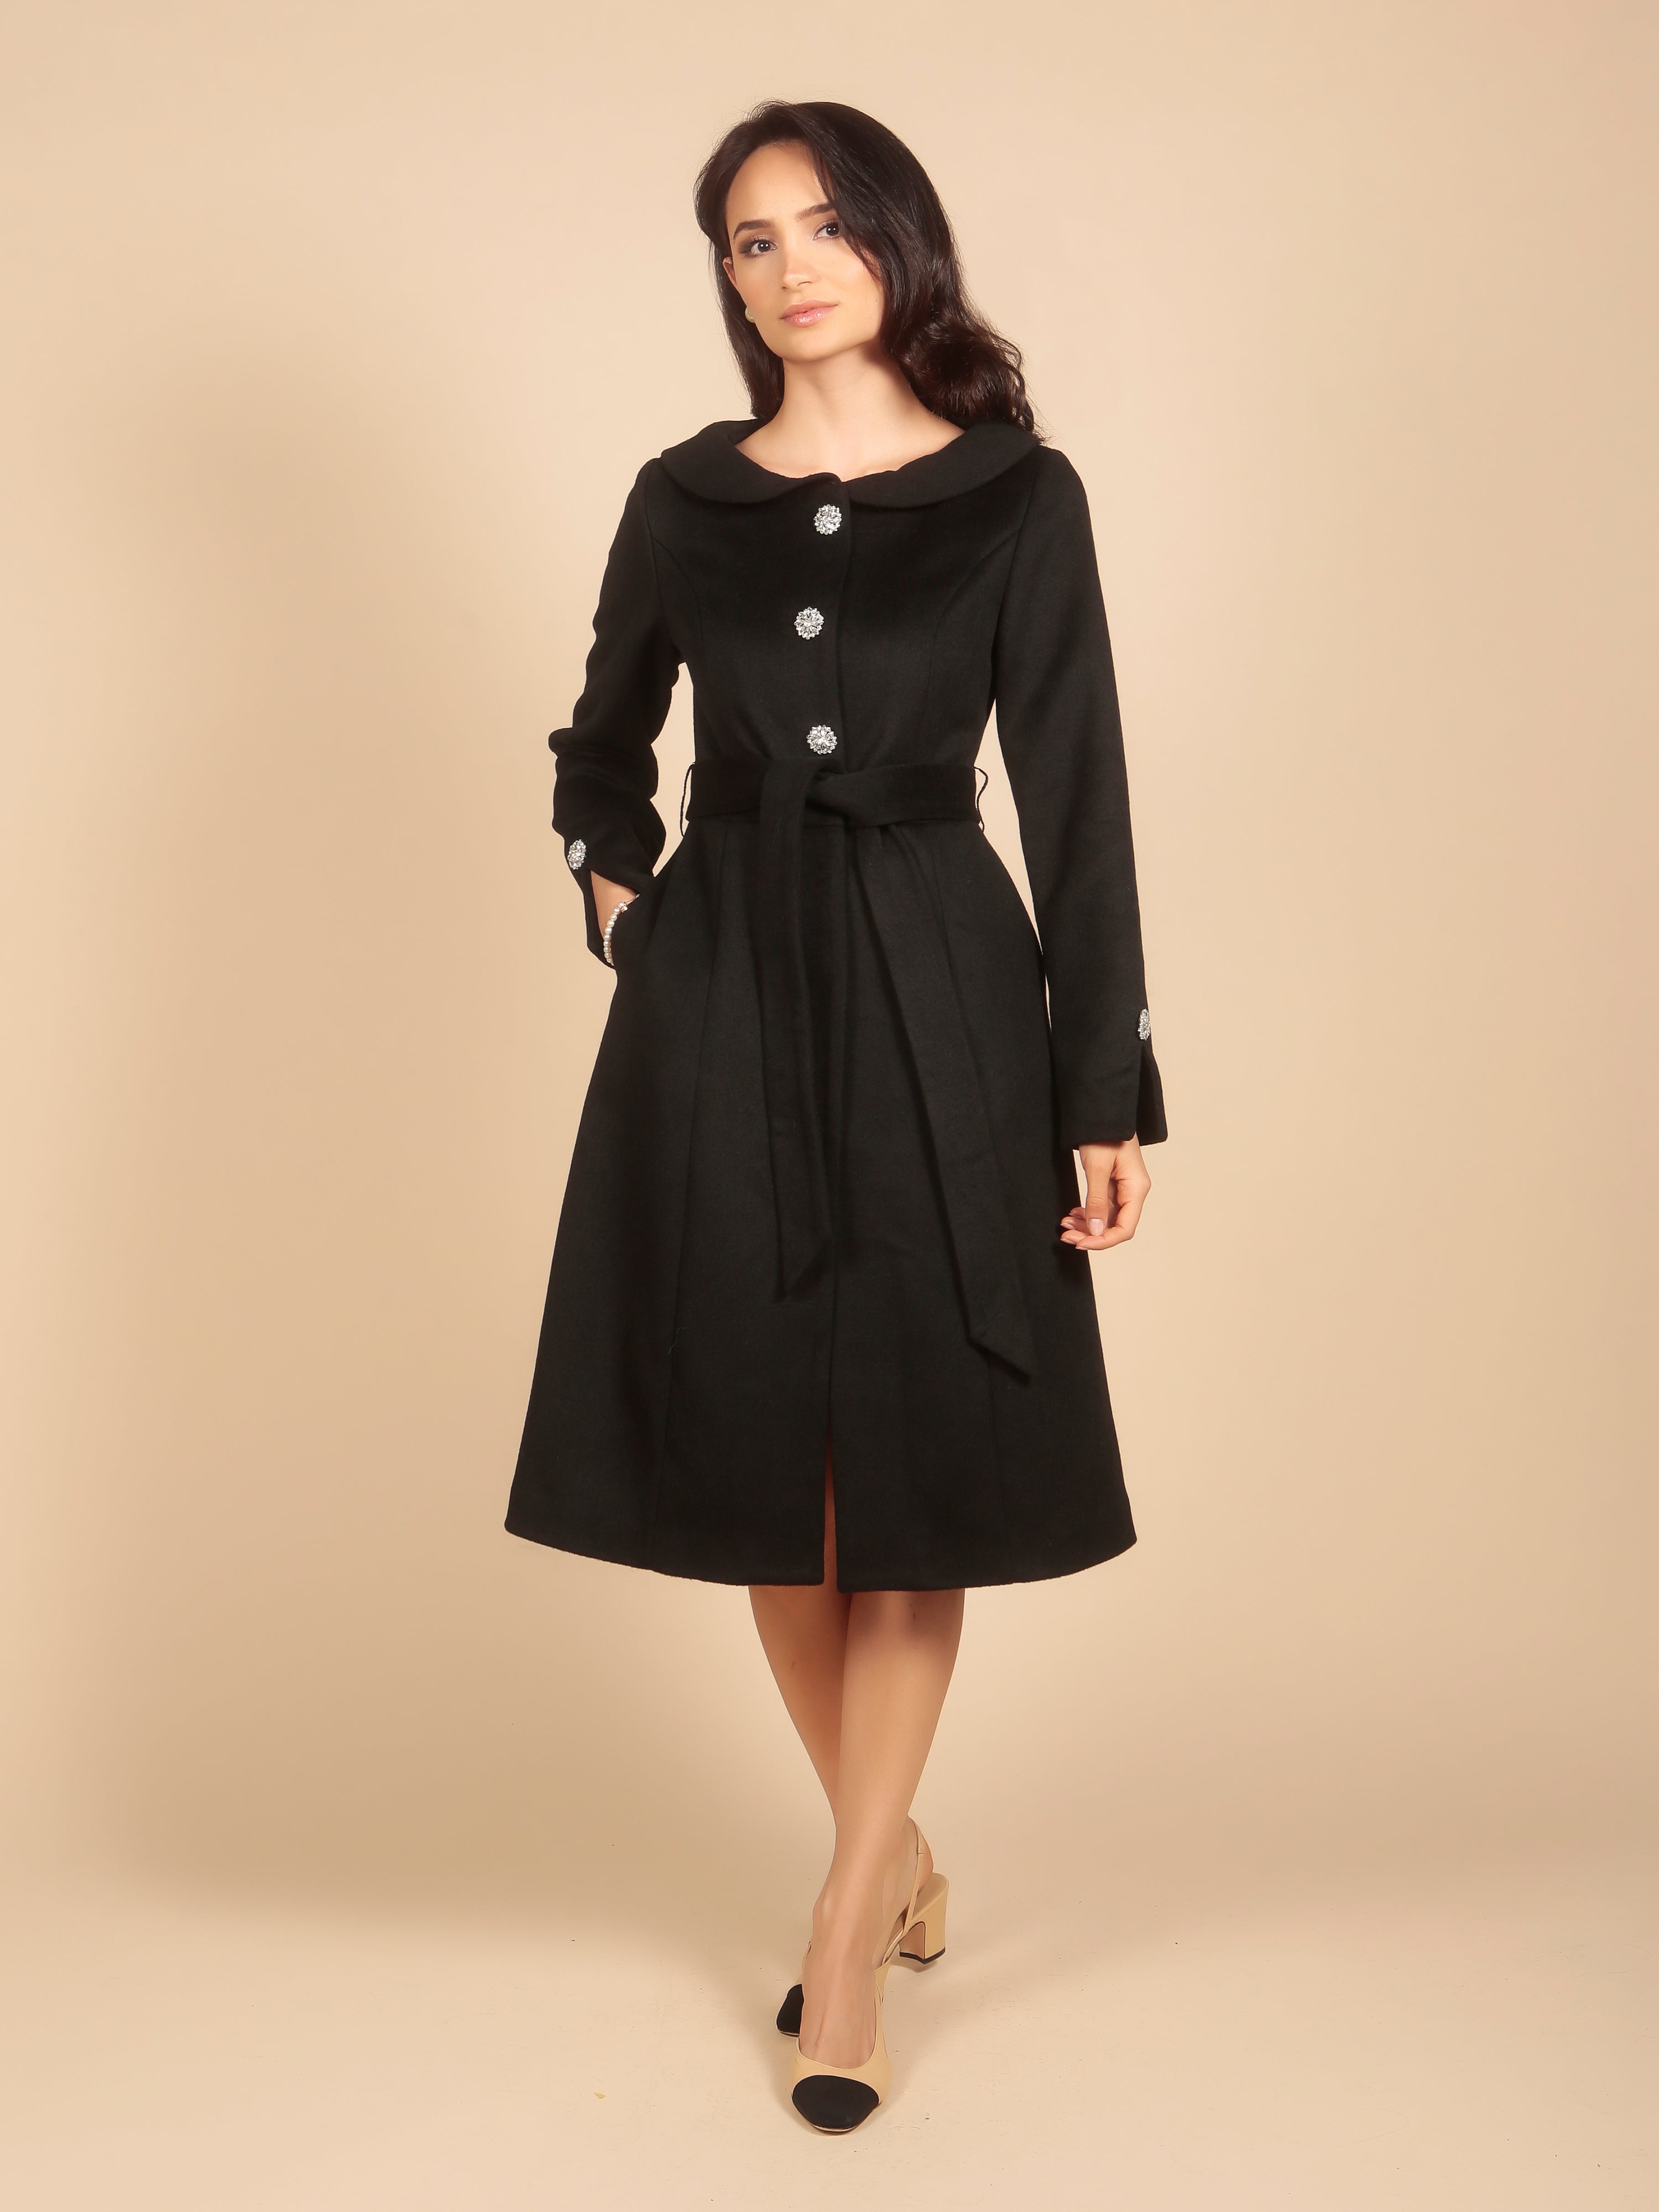 'Ingrid' Cashmere and Wool Dress Coat in Nero